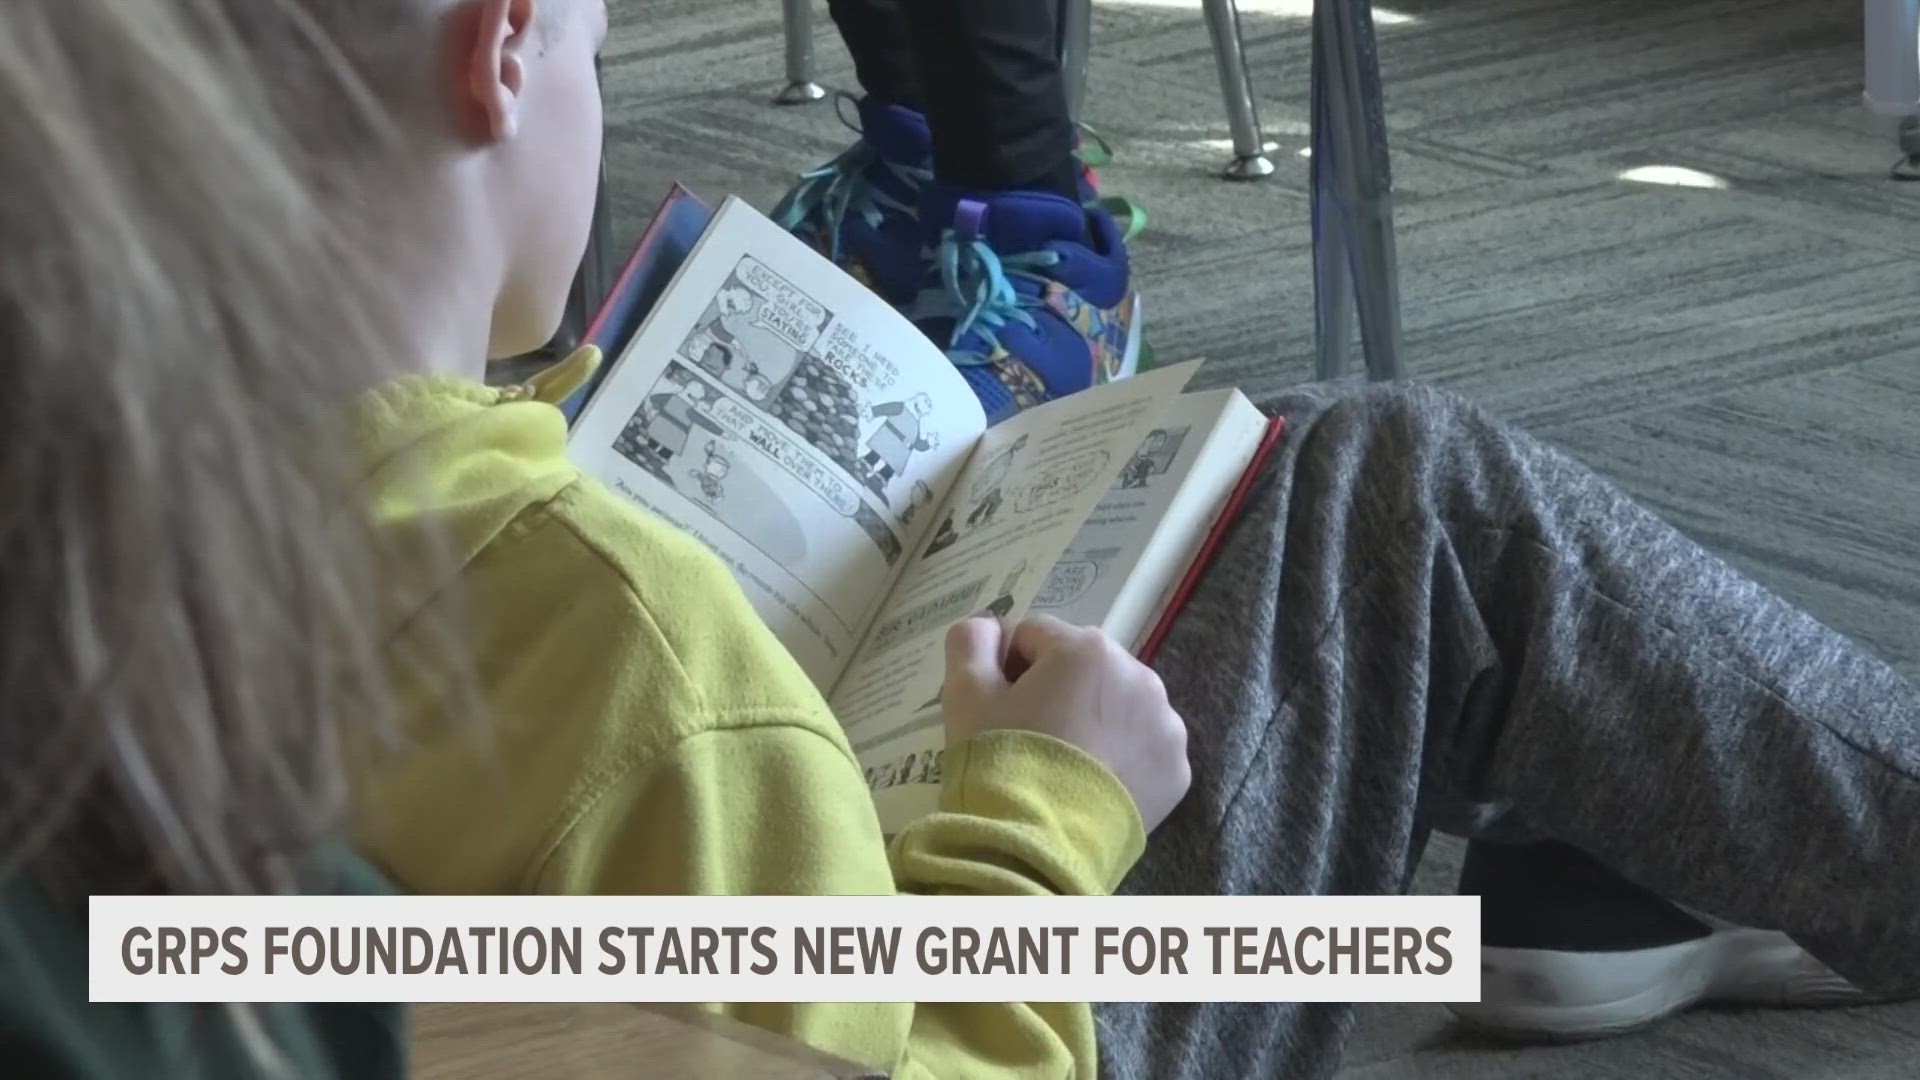 The Grand Rapids Public Schools Foundation launched a new grant, allowing teachers to use the funds to improve their student's classroom experience.